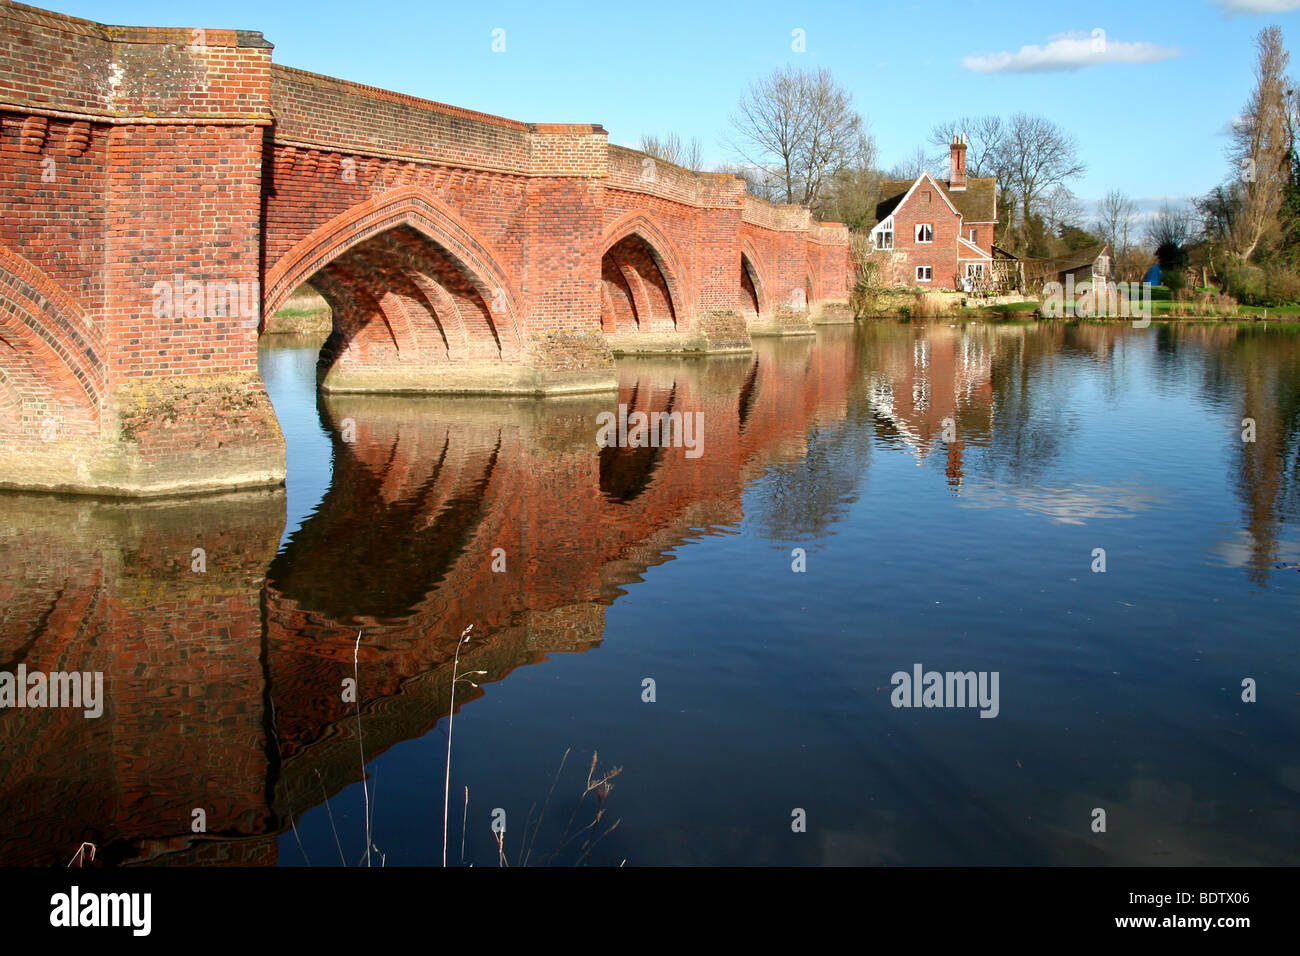 Close-up view of the arches of the Clifton Hampden bridge Stock Photo